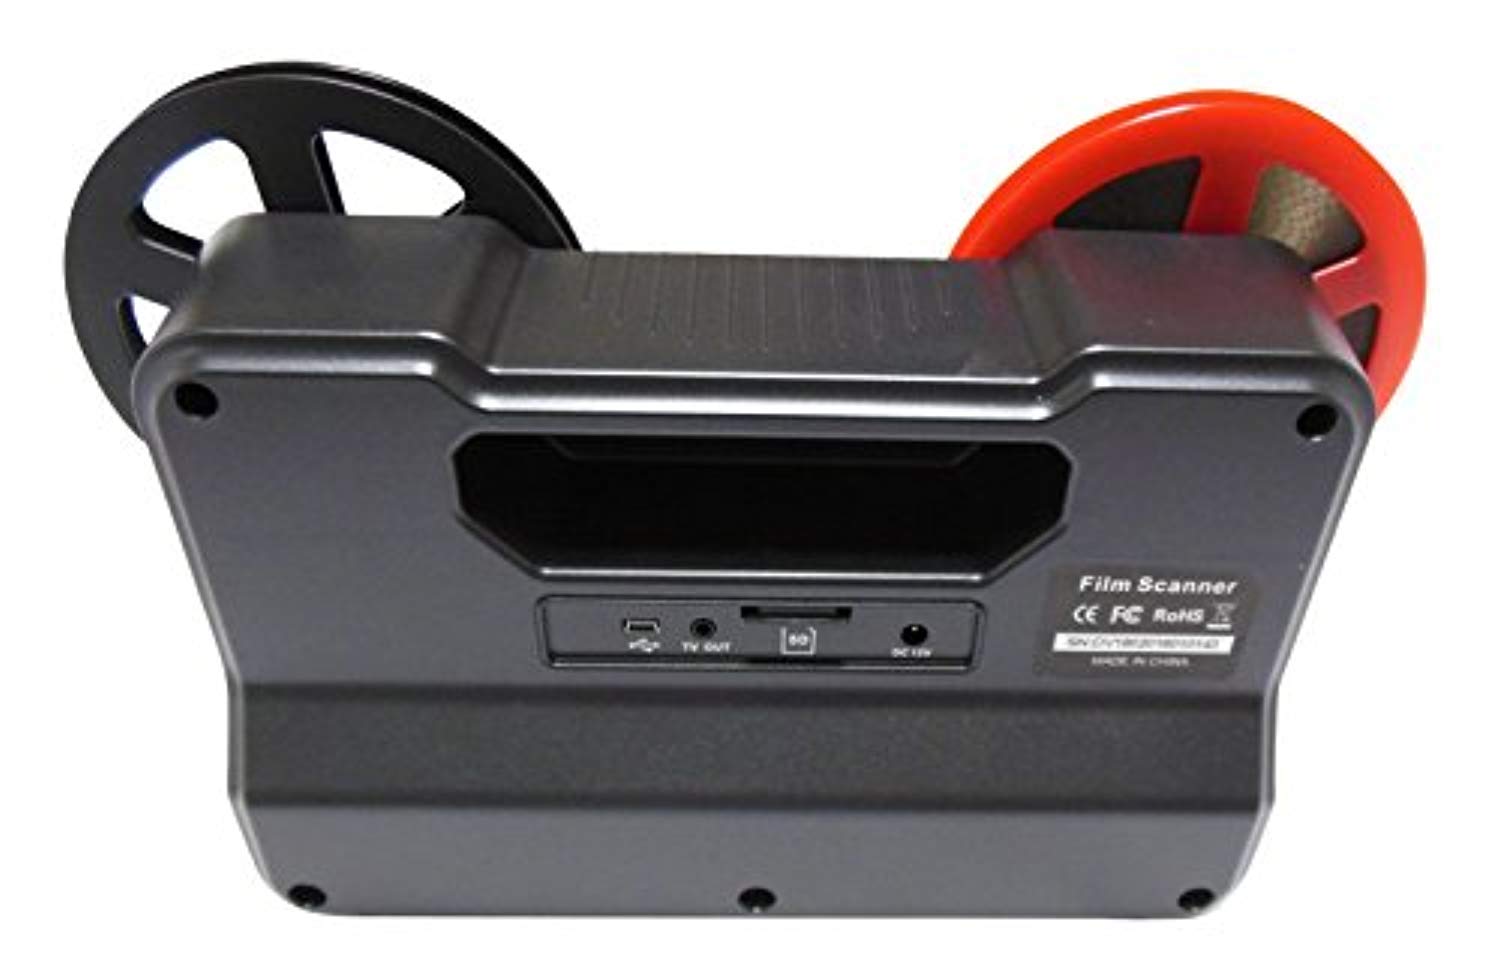 Magnasonic All-in-One Super 8/8mm Film Scanner, Converts Film into